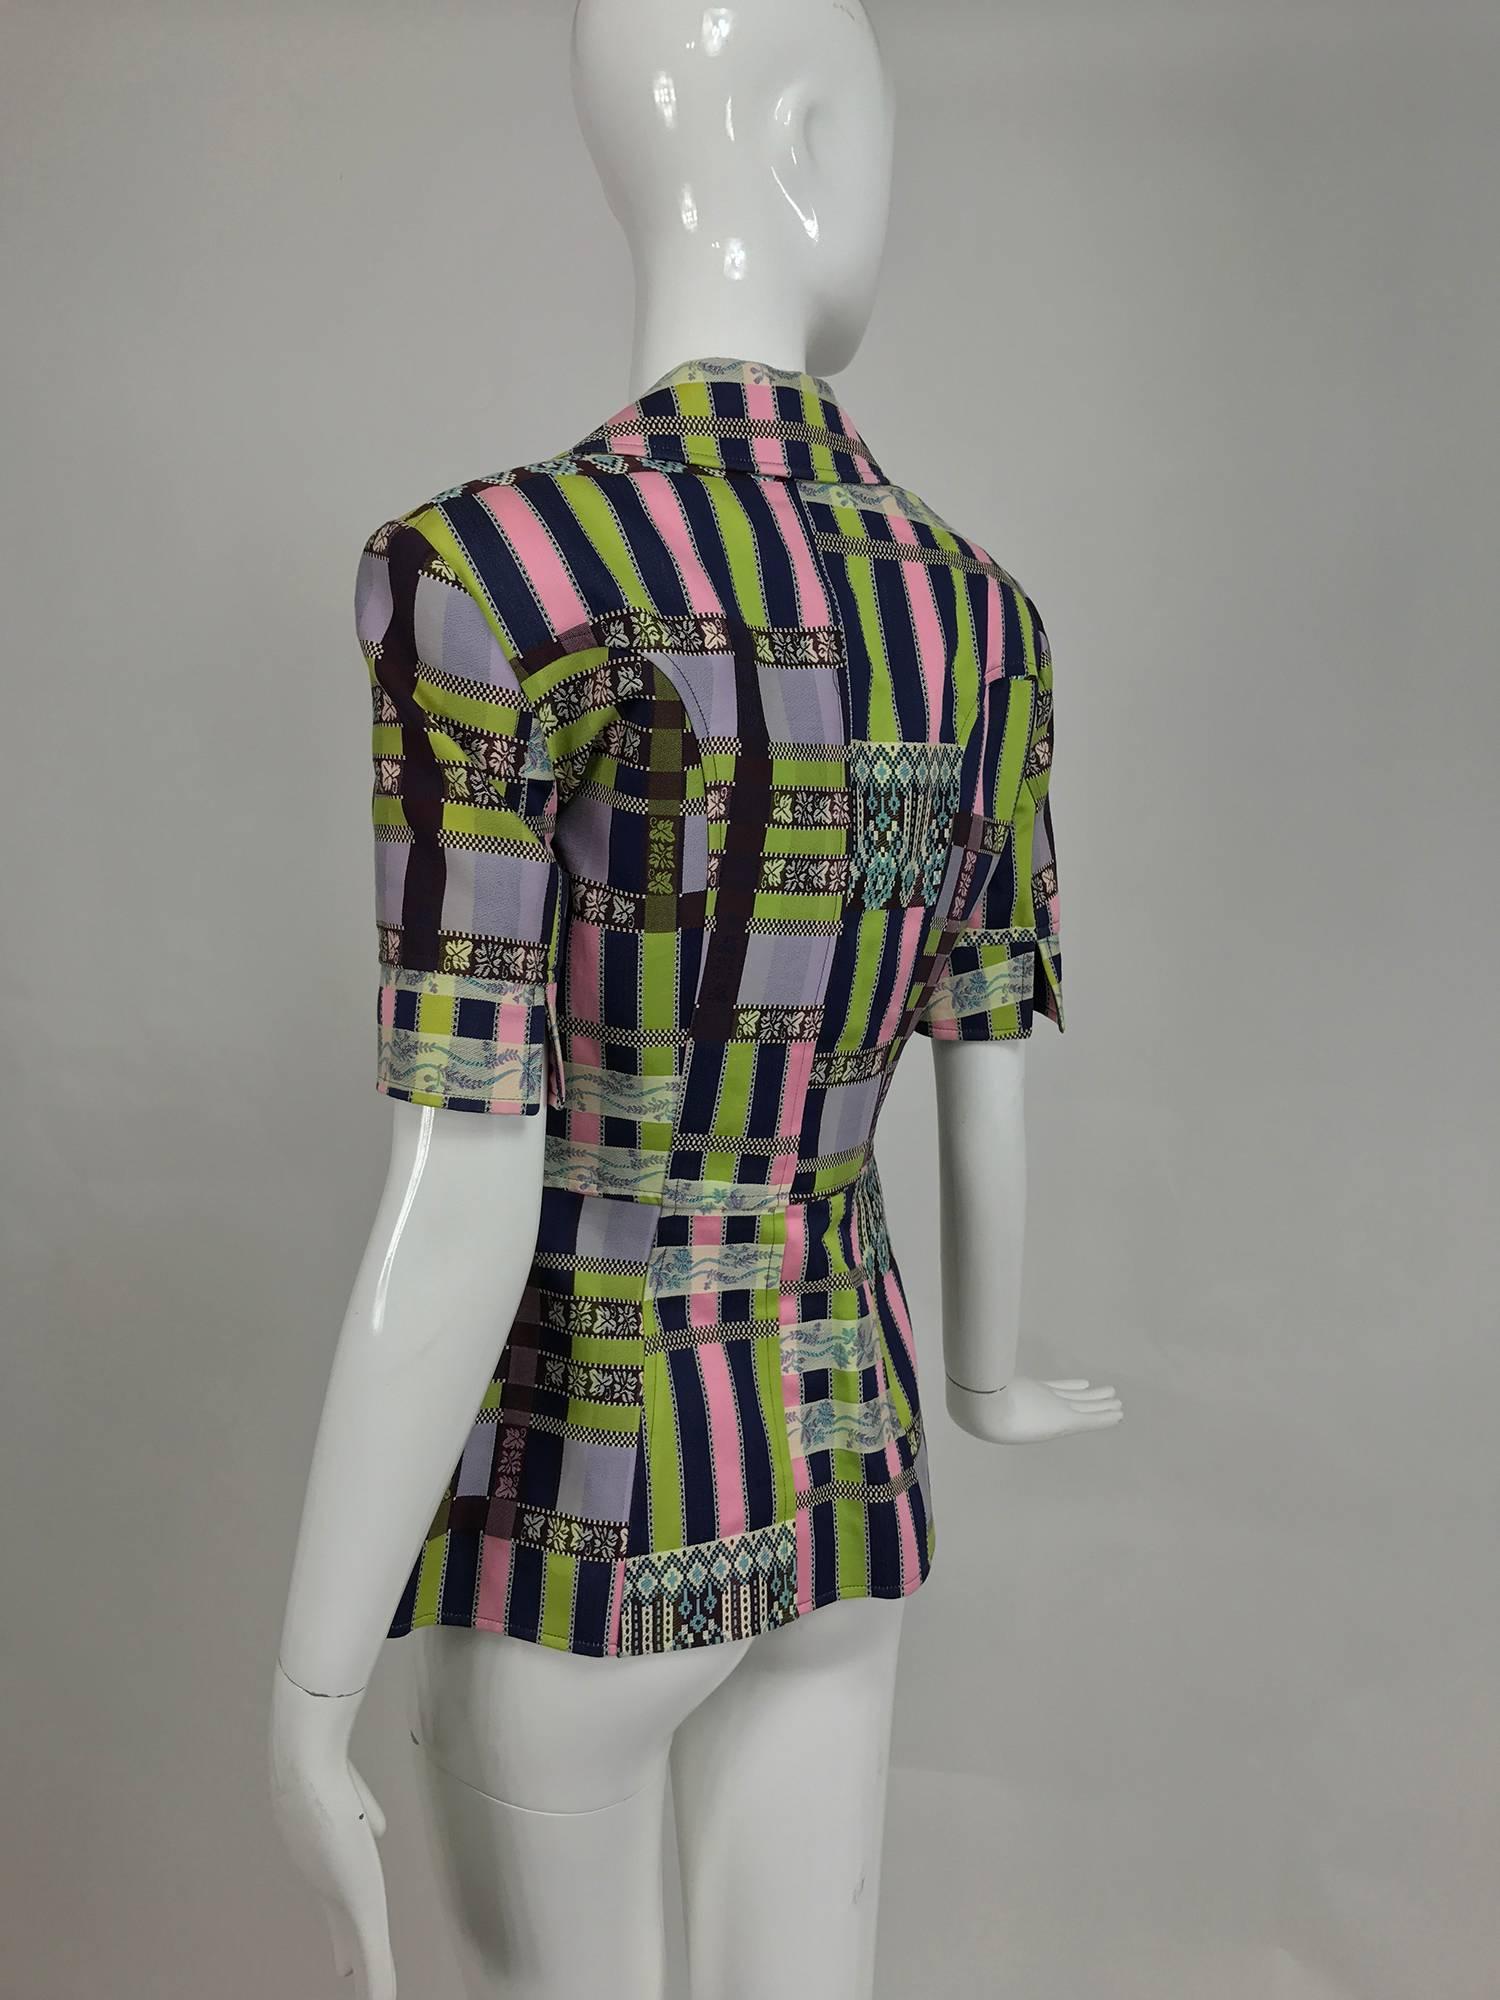 Christian LaCroix Bazar zipper front Short sleeve jacket 1980s In Excellent Condition For Sale In West Palm Beach, FL